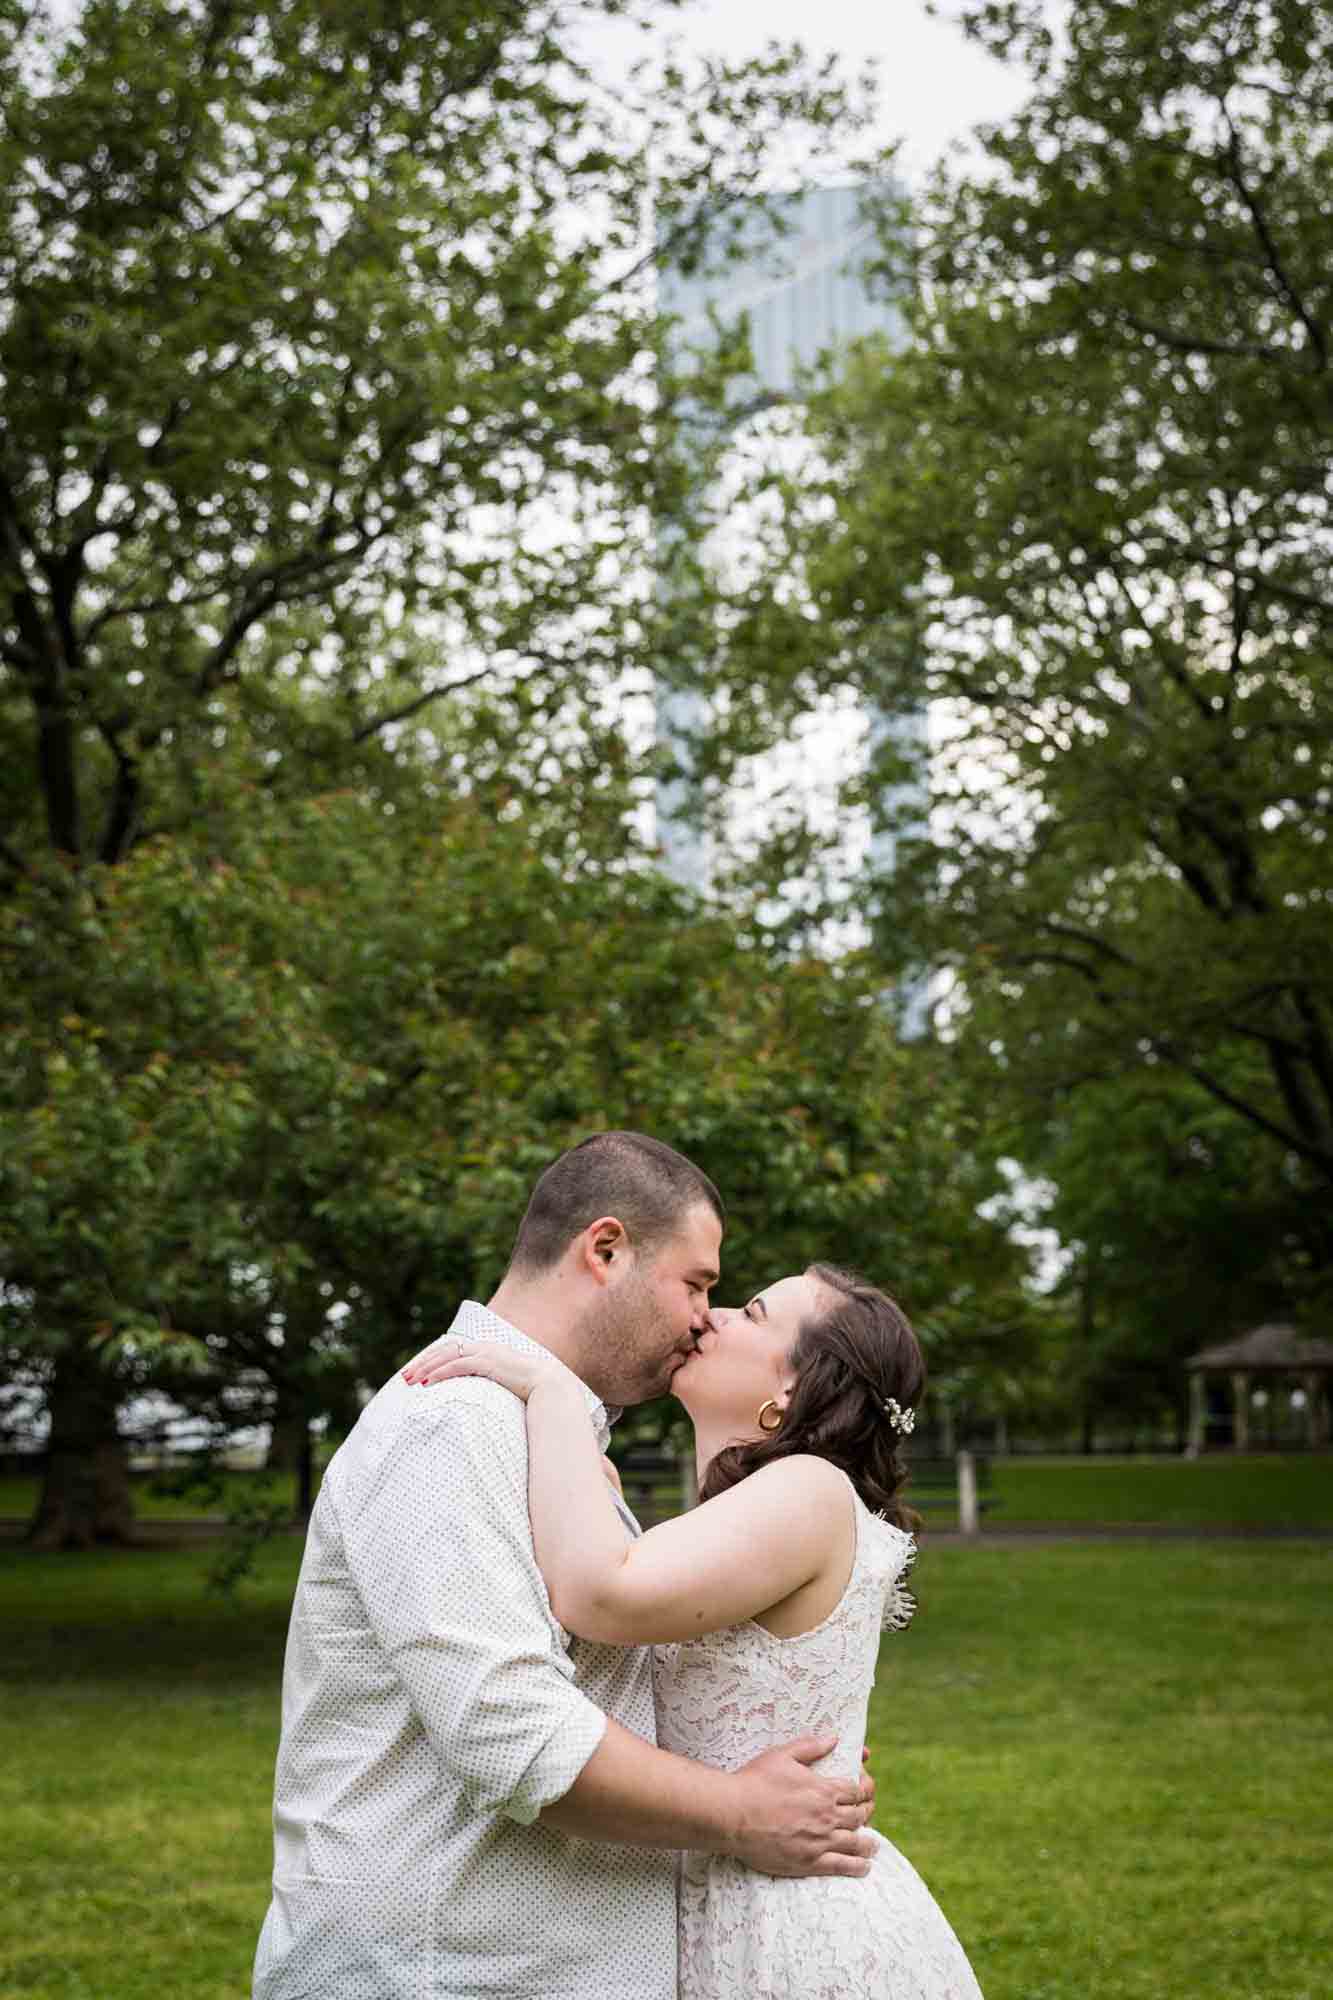 Couple kissing in front of trees during a Dyker Heights engagement shoot